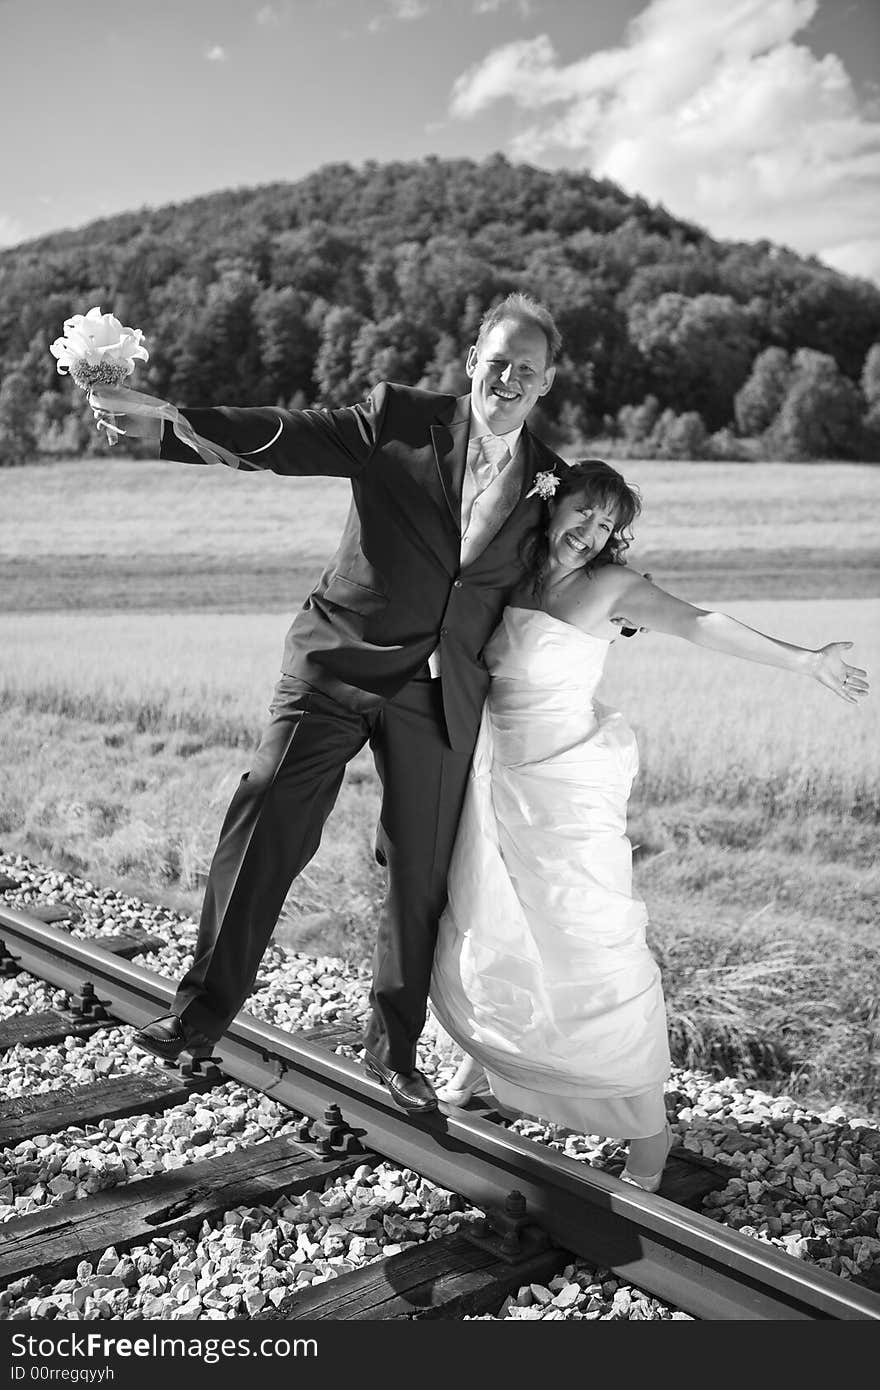 Bridal couple on rails, being in the nature. Great azure sky. Great summer! He balances with one foot on the rail. Black-white, monochrome. Bridal couple on rails, being in the nature. Great azure sky. Great summer! He balances with one foot on the rail. Black-white, monochrome.